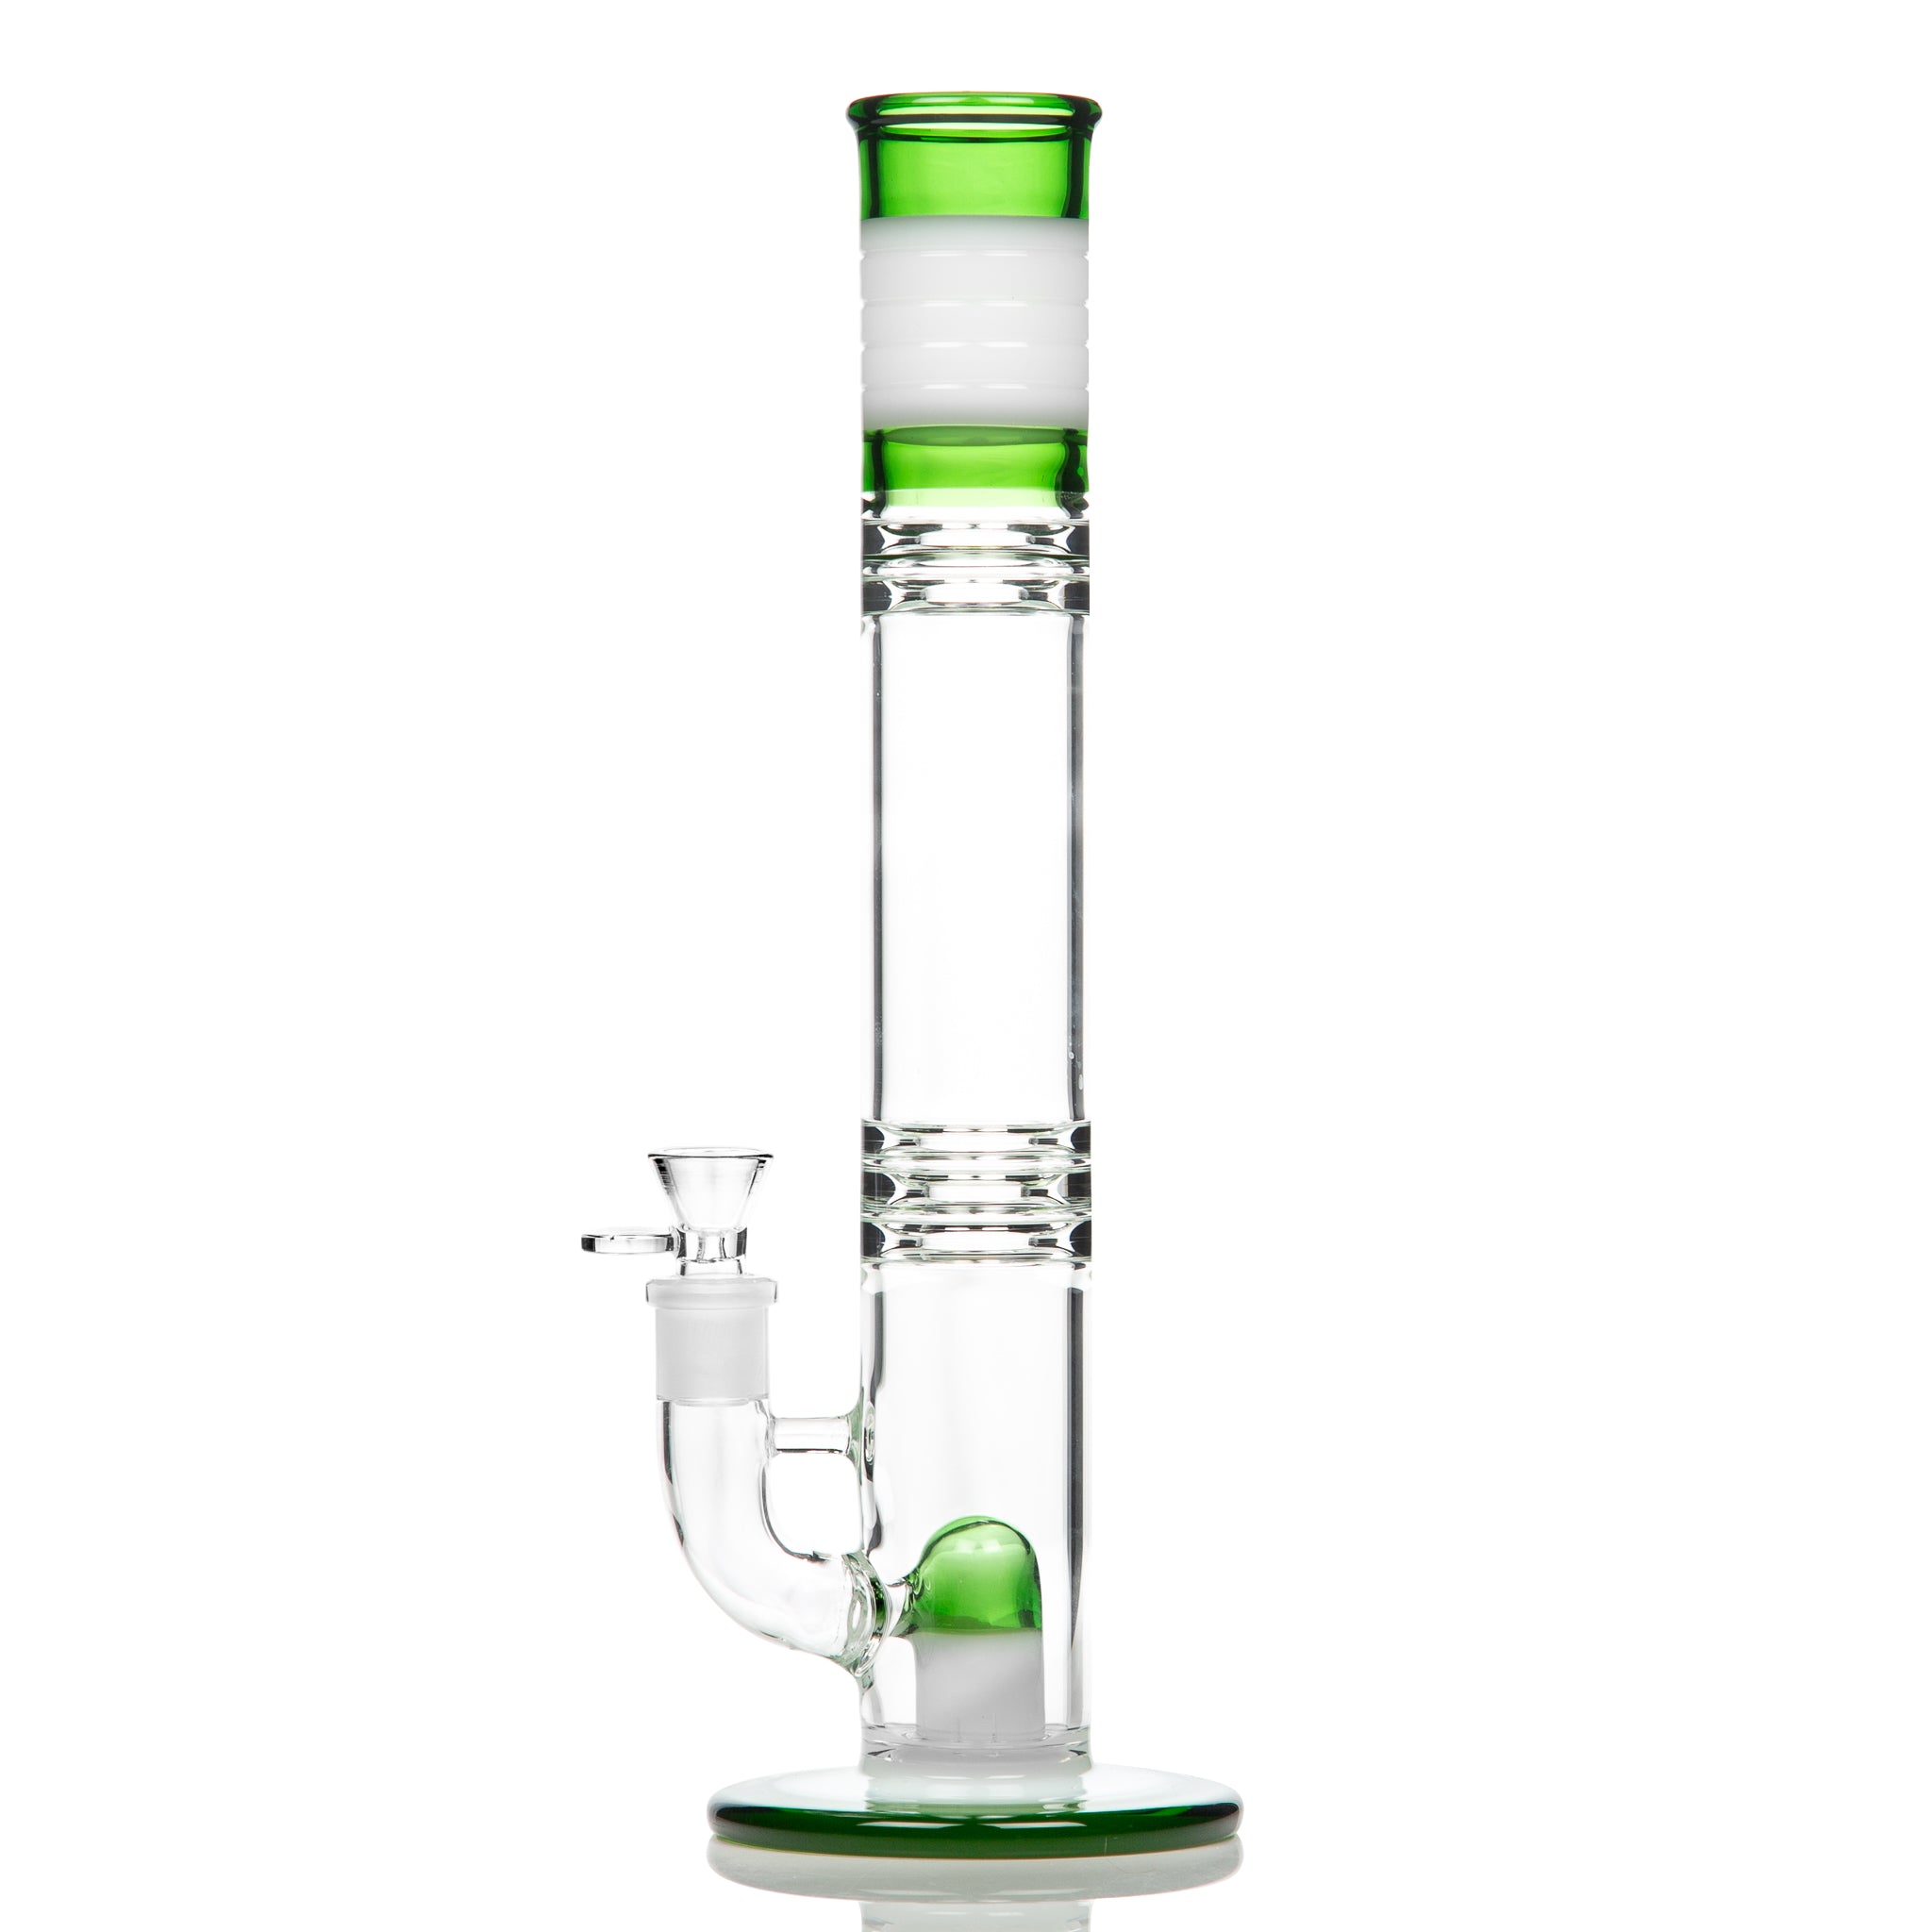 Straight glass bong with coloured glass and stemless design.